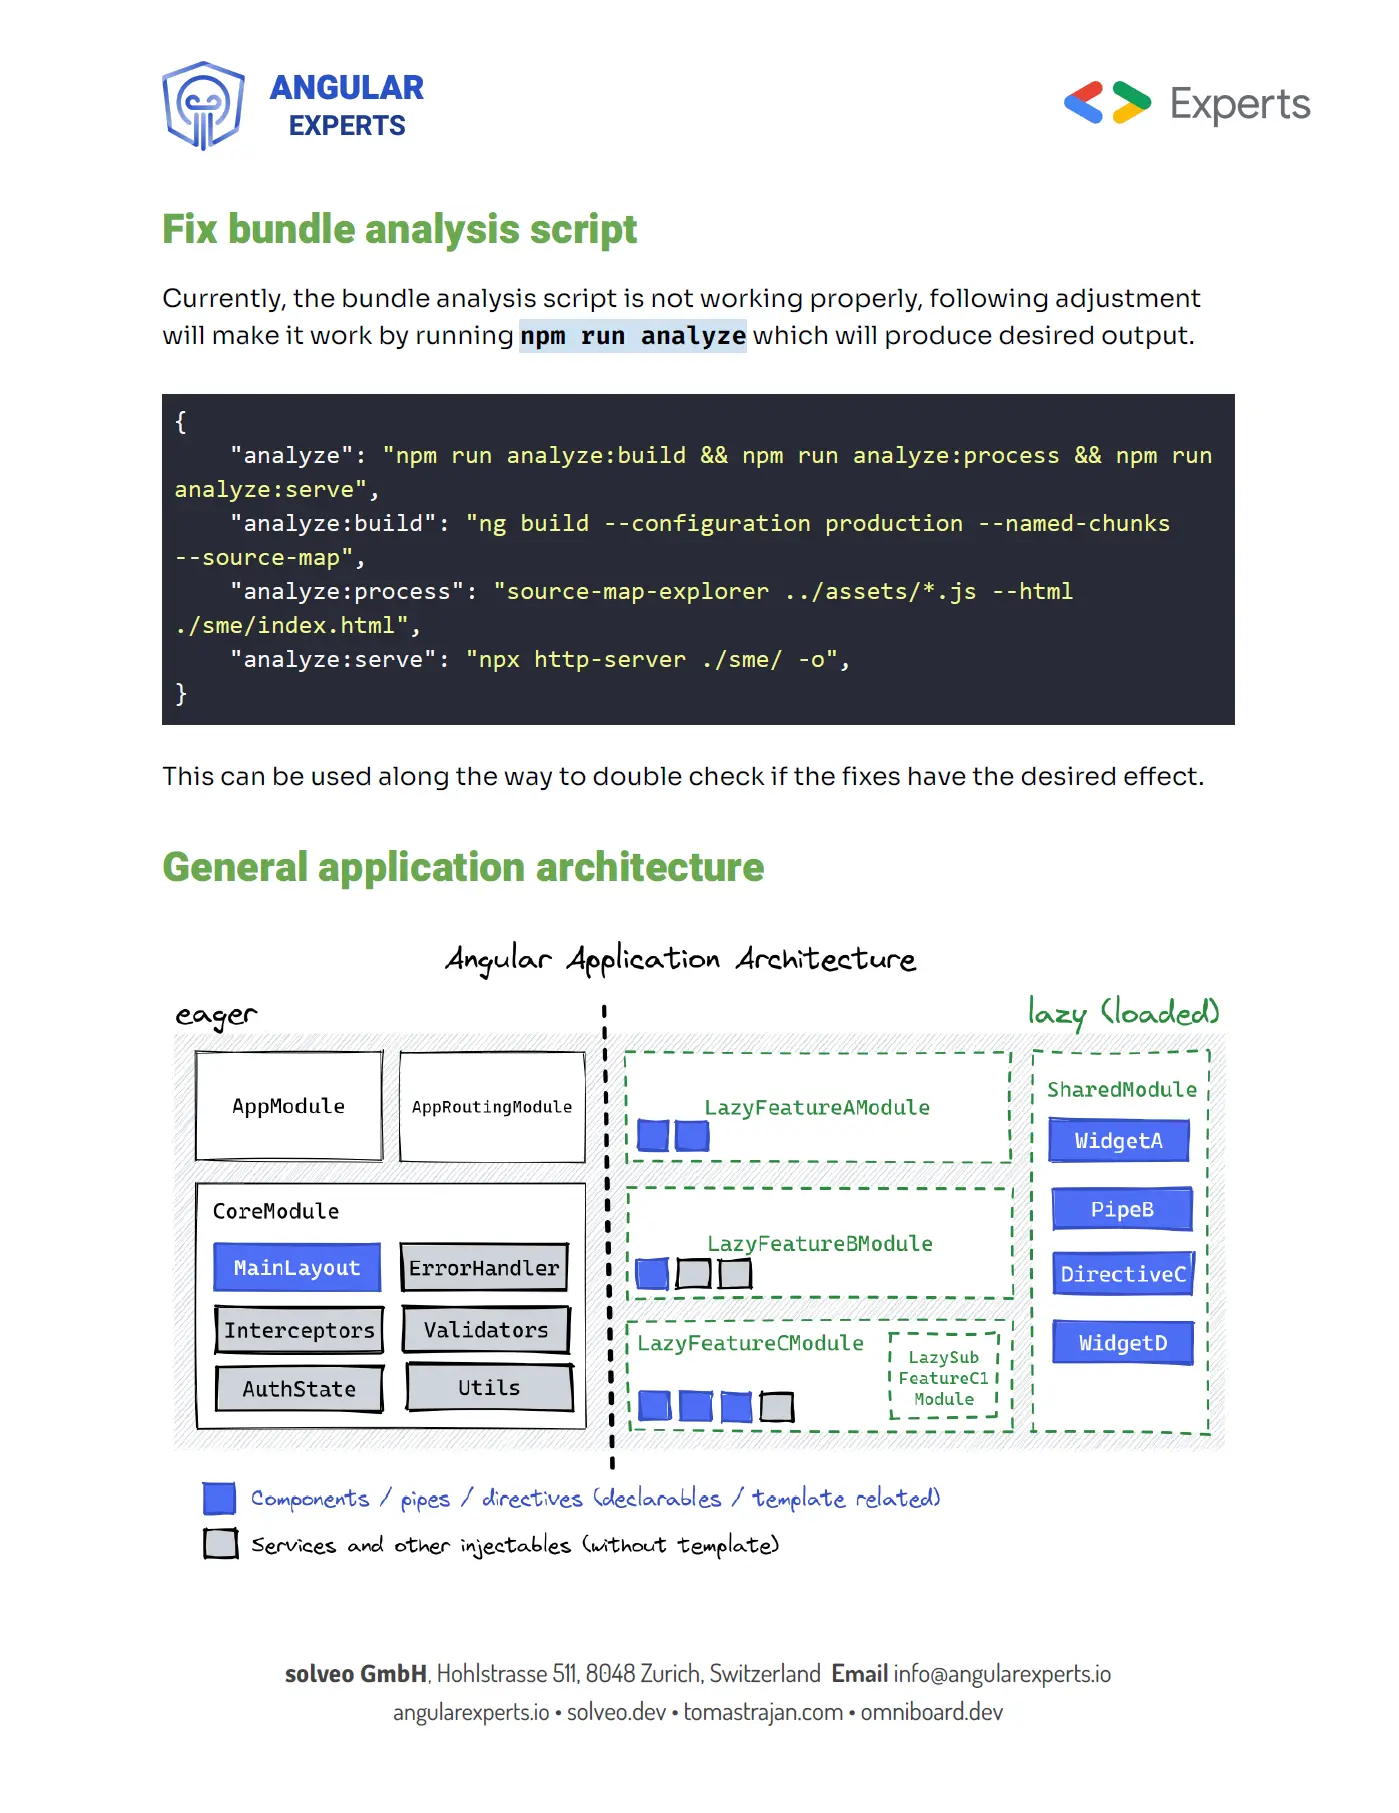 Example page of the Angular project review document by Angular Experts